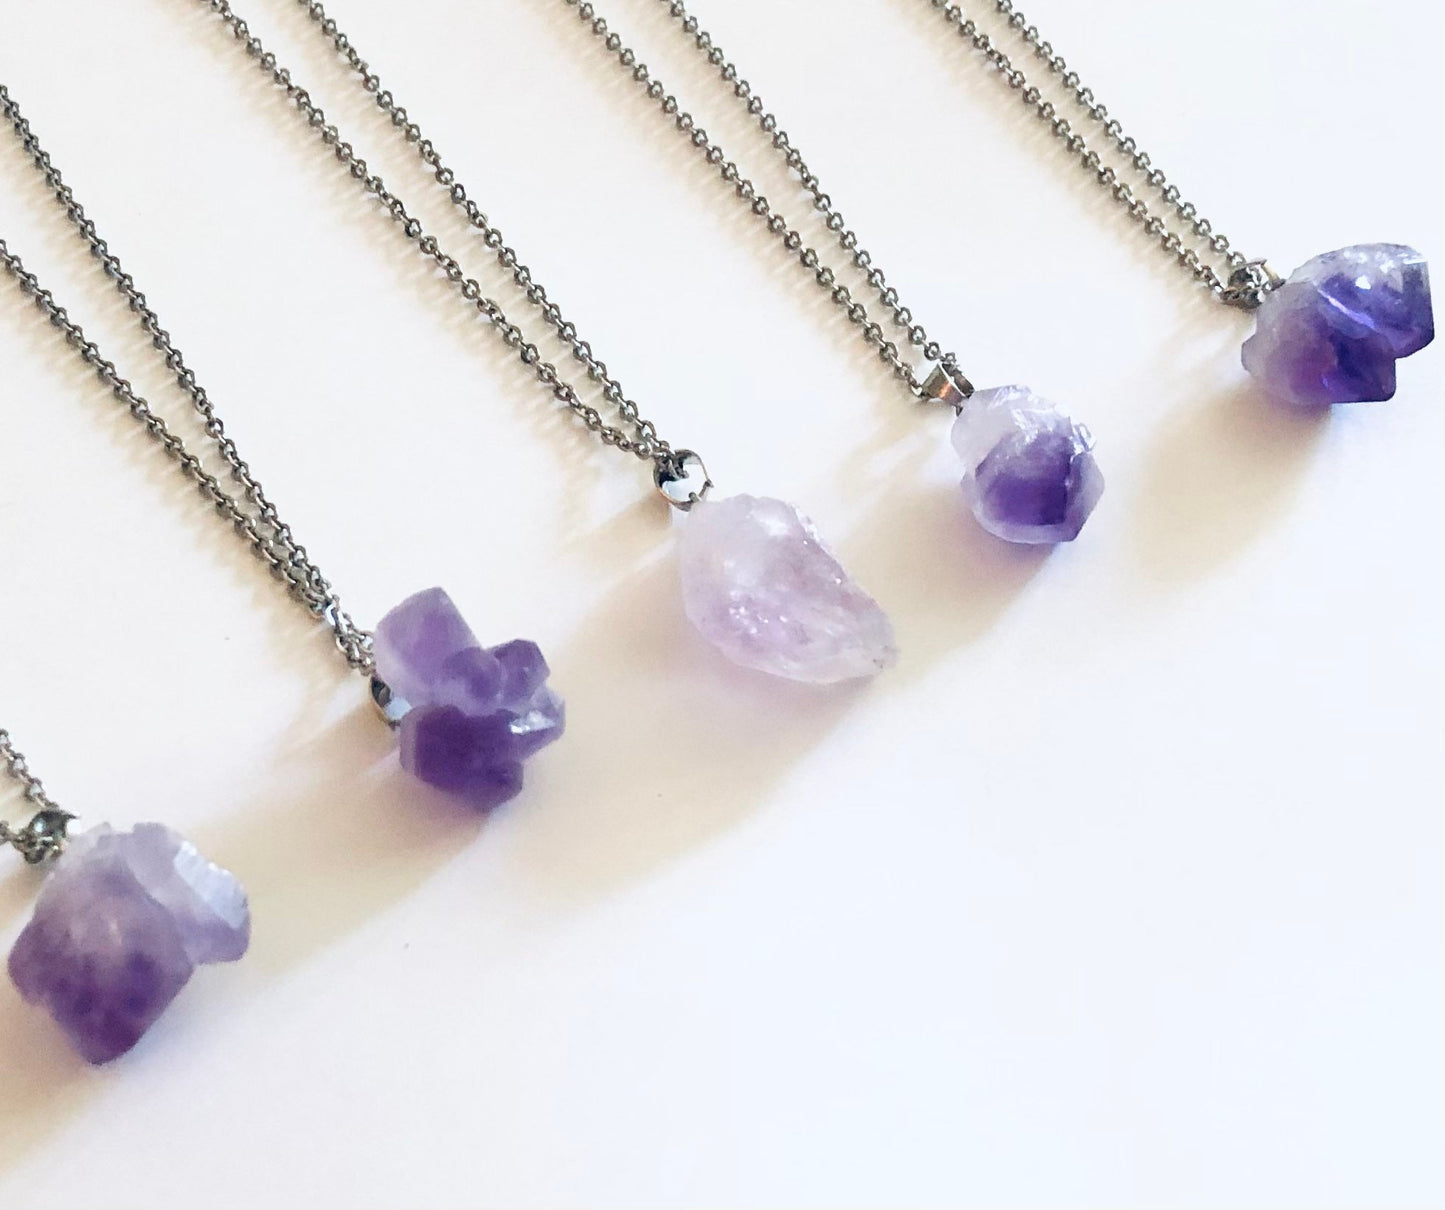 Amethyst Necklace, Real Raw Natural Crystal Necklace, Silver Chain. Hippie Boho Witchy Jewelry Bohemian Yoga Necklace